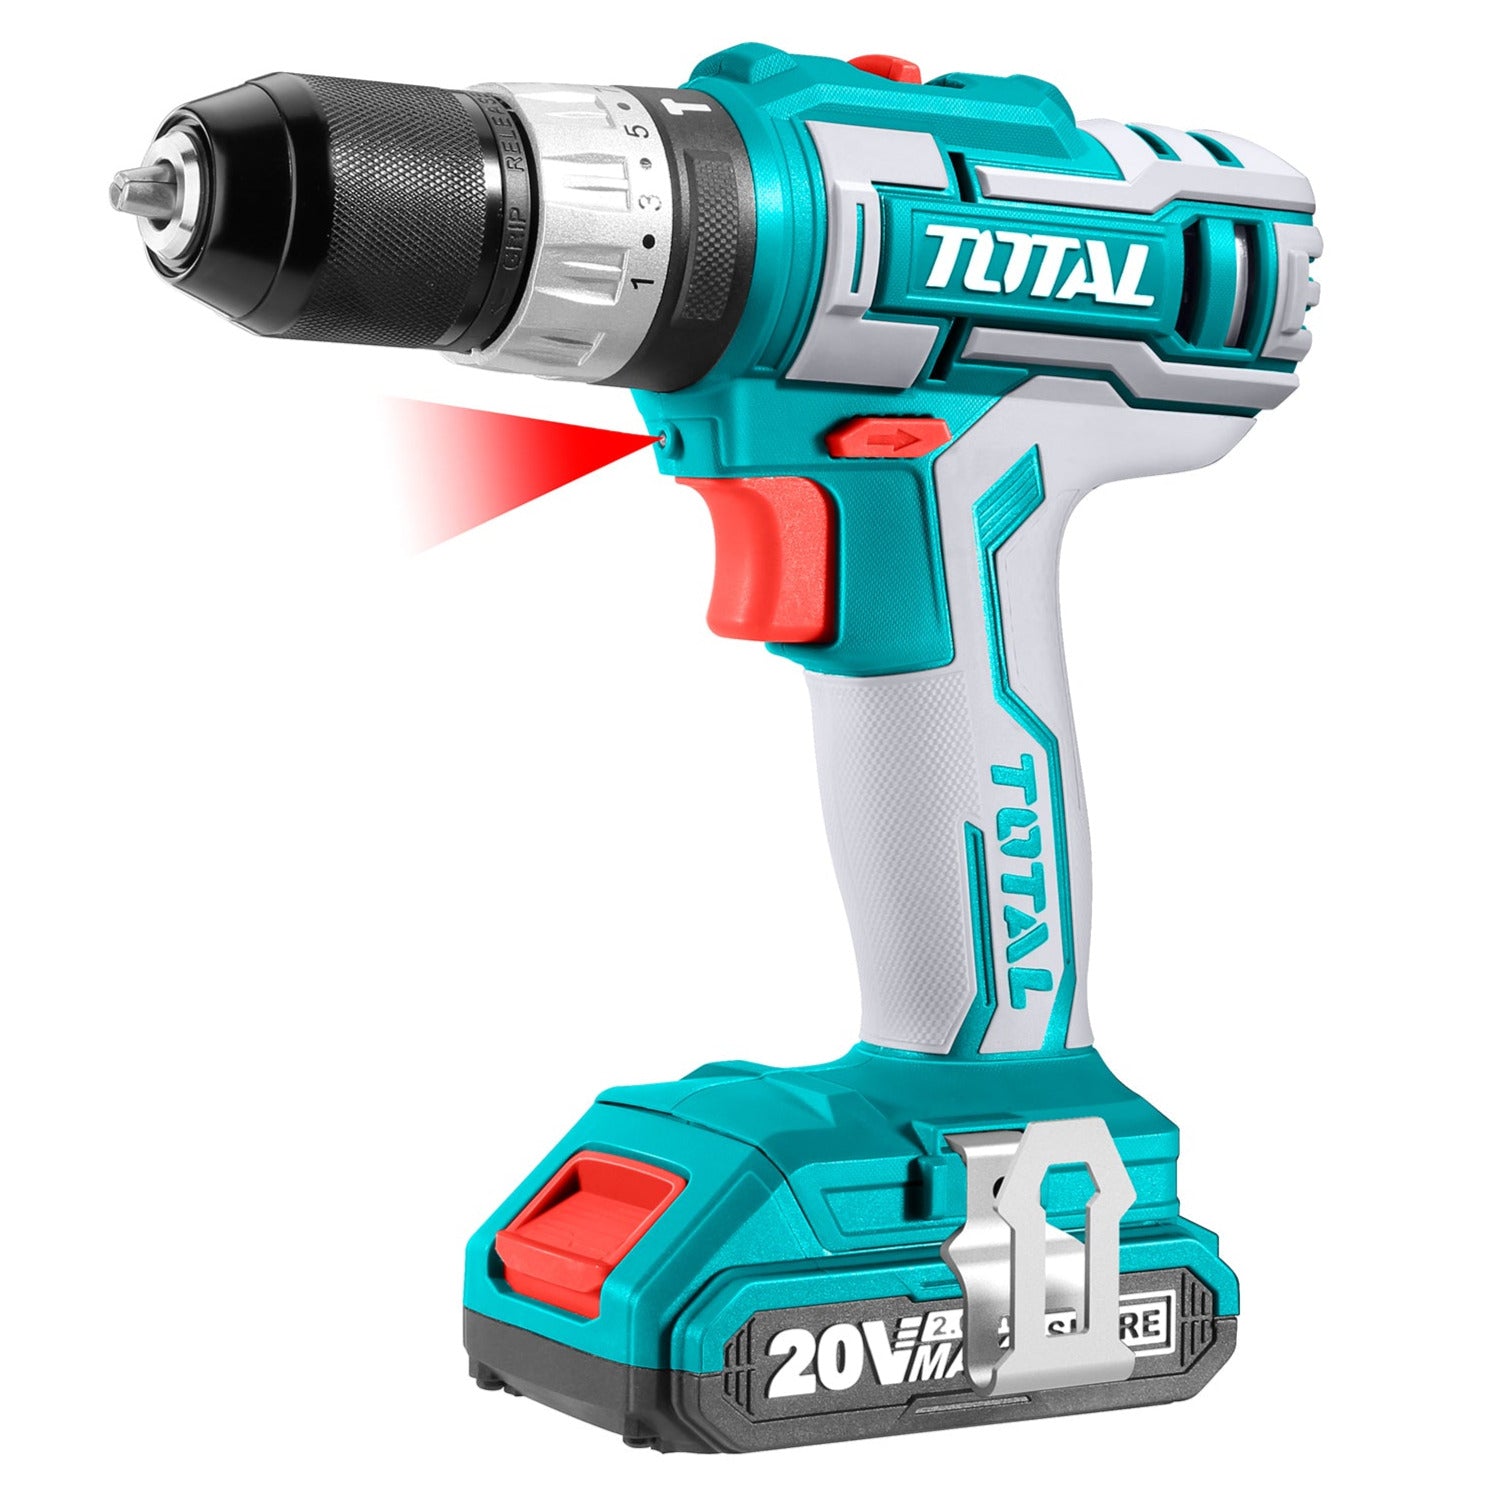 Total Li-Ion 20V Impact Drill (with 2 x Batteries & Charger) - TIDLI2002